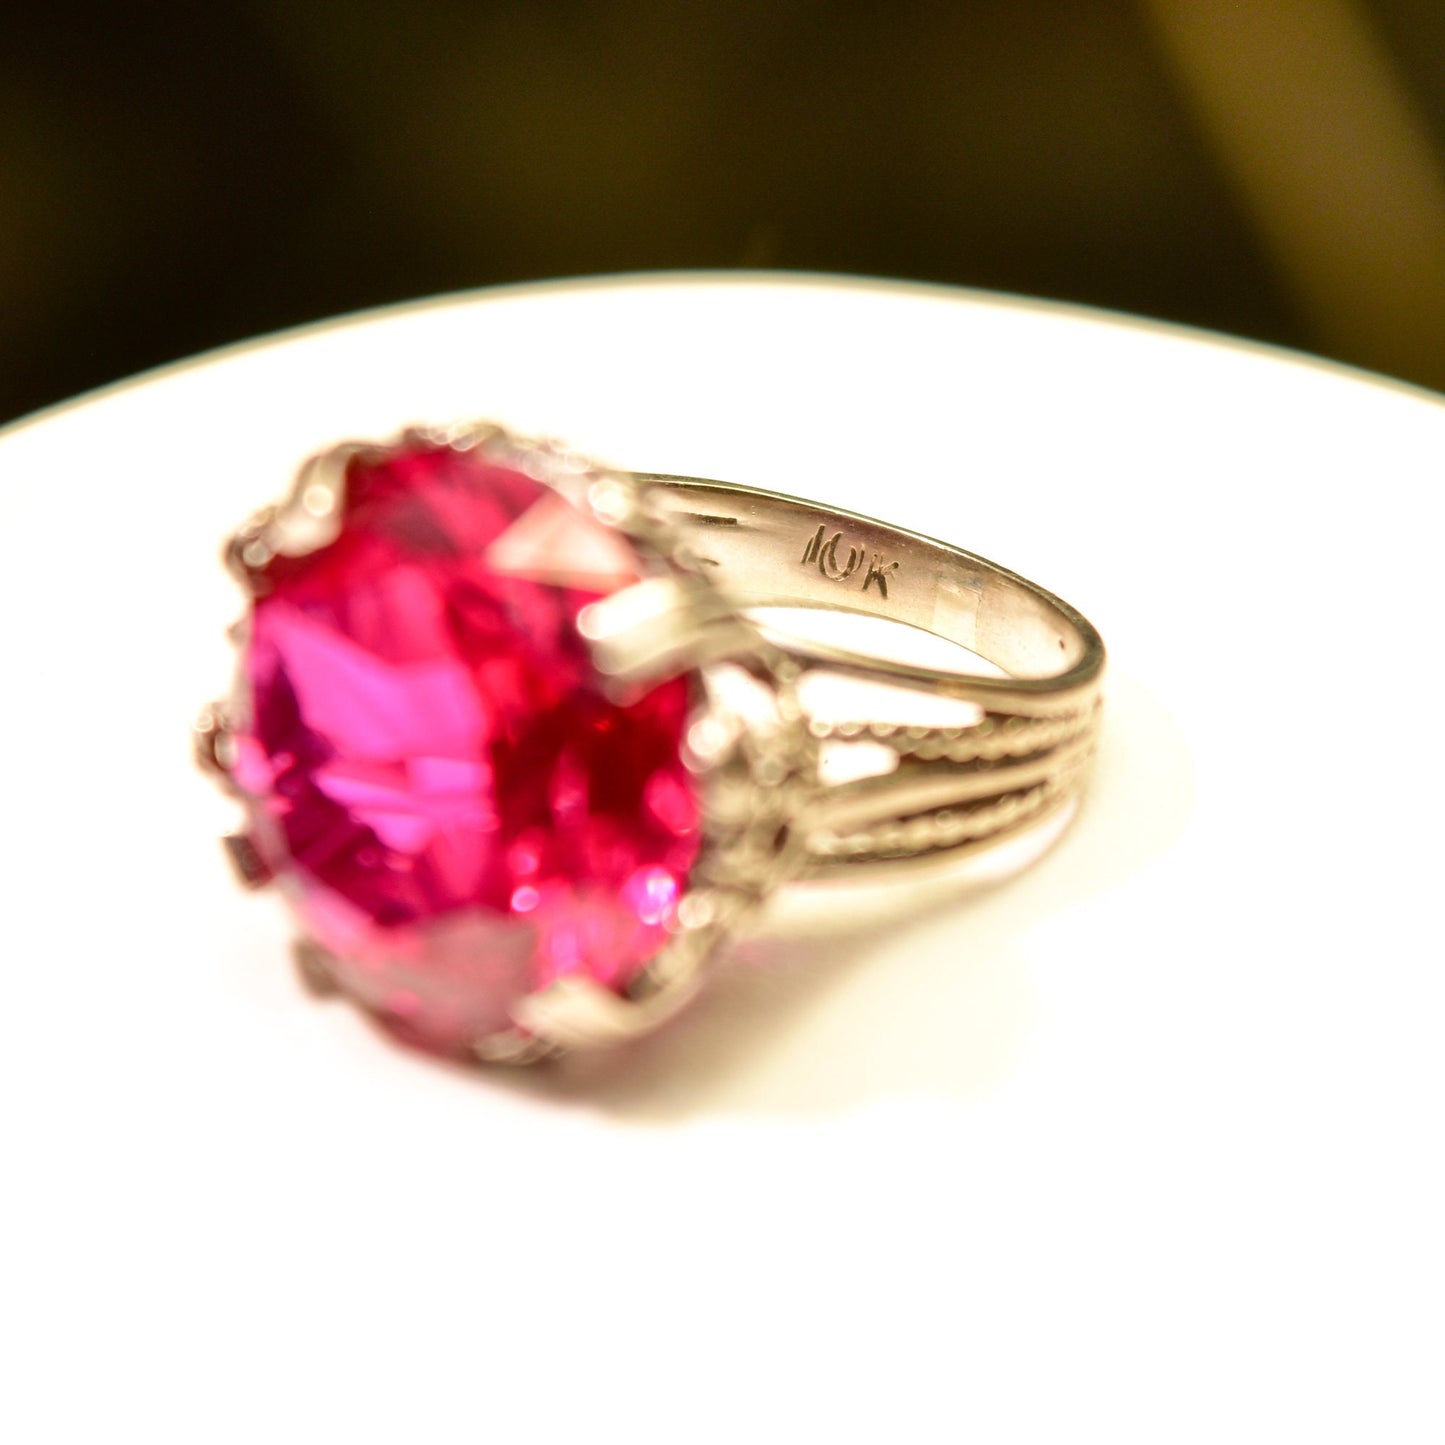 10K white gold ornate filigree cocktail ring featuring a large round synthetic pink ruby, Art Deco style, size 6 3/4 US.